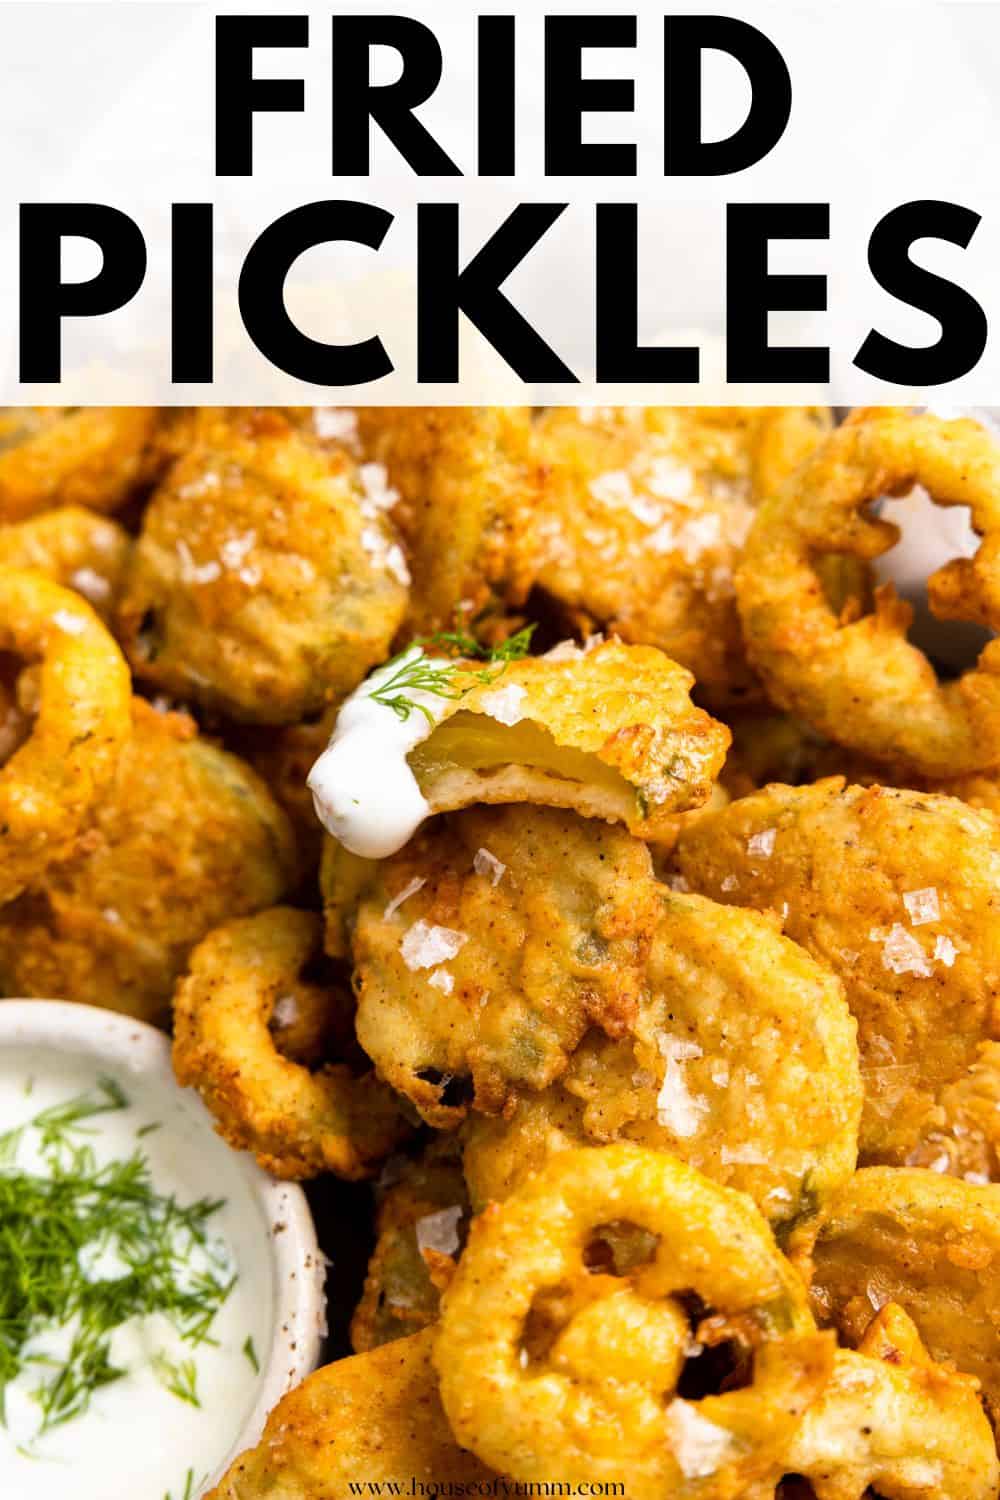 Fried pickles with text.